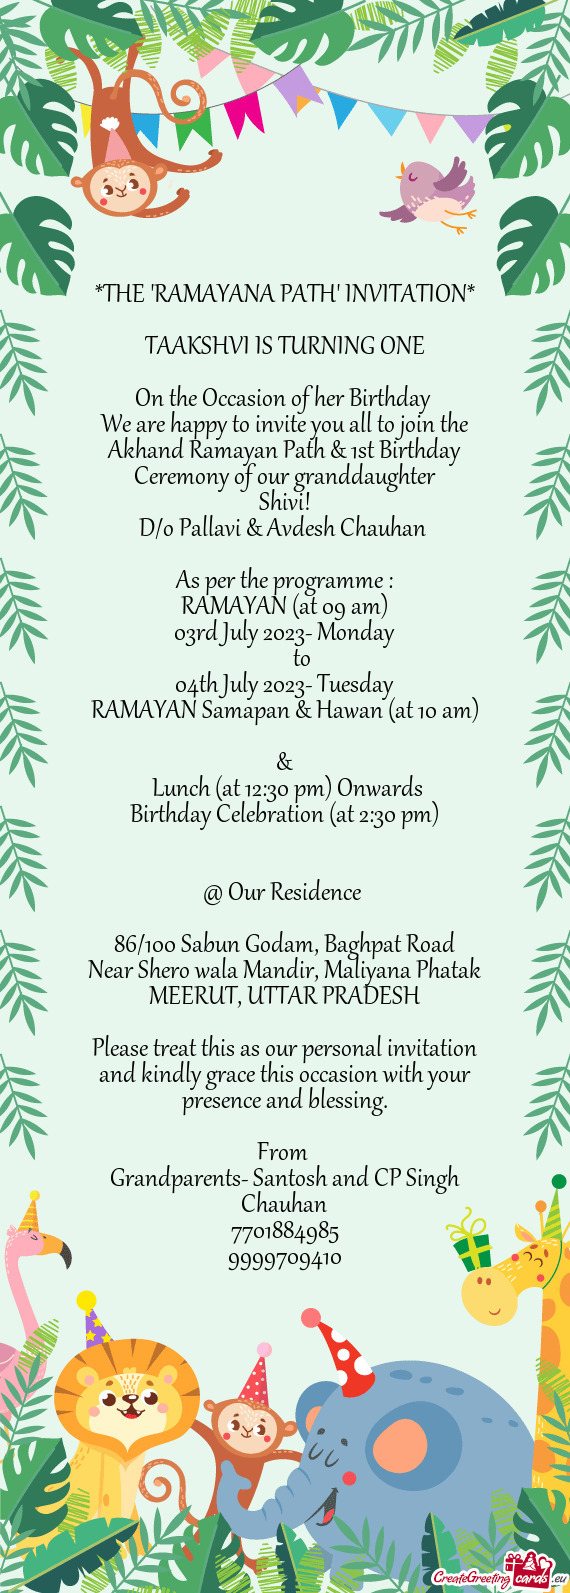 We are happy to invite you all to join the Akhand Ramayan Path & 1st Birthday Ceremony of our grandd